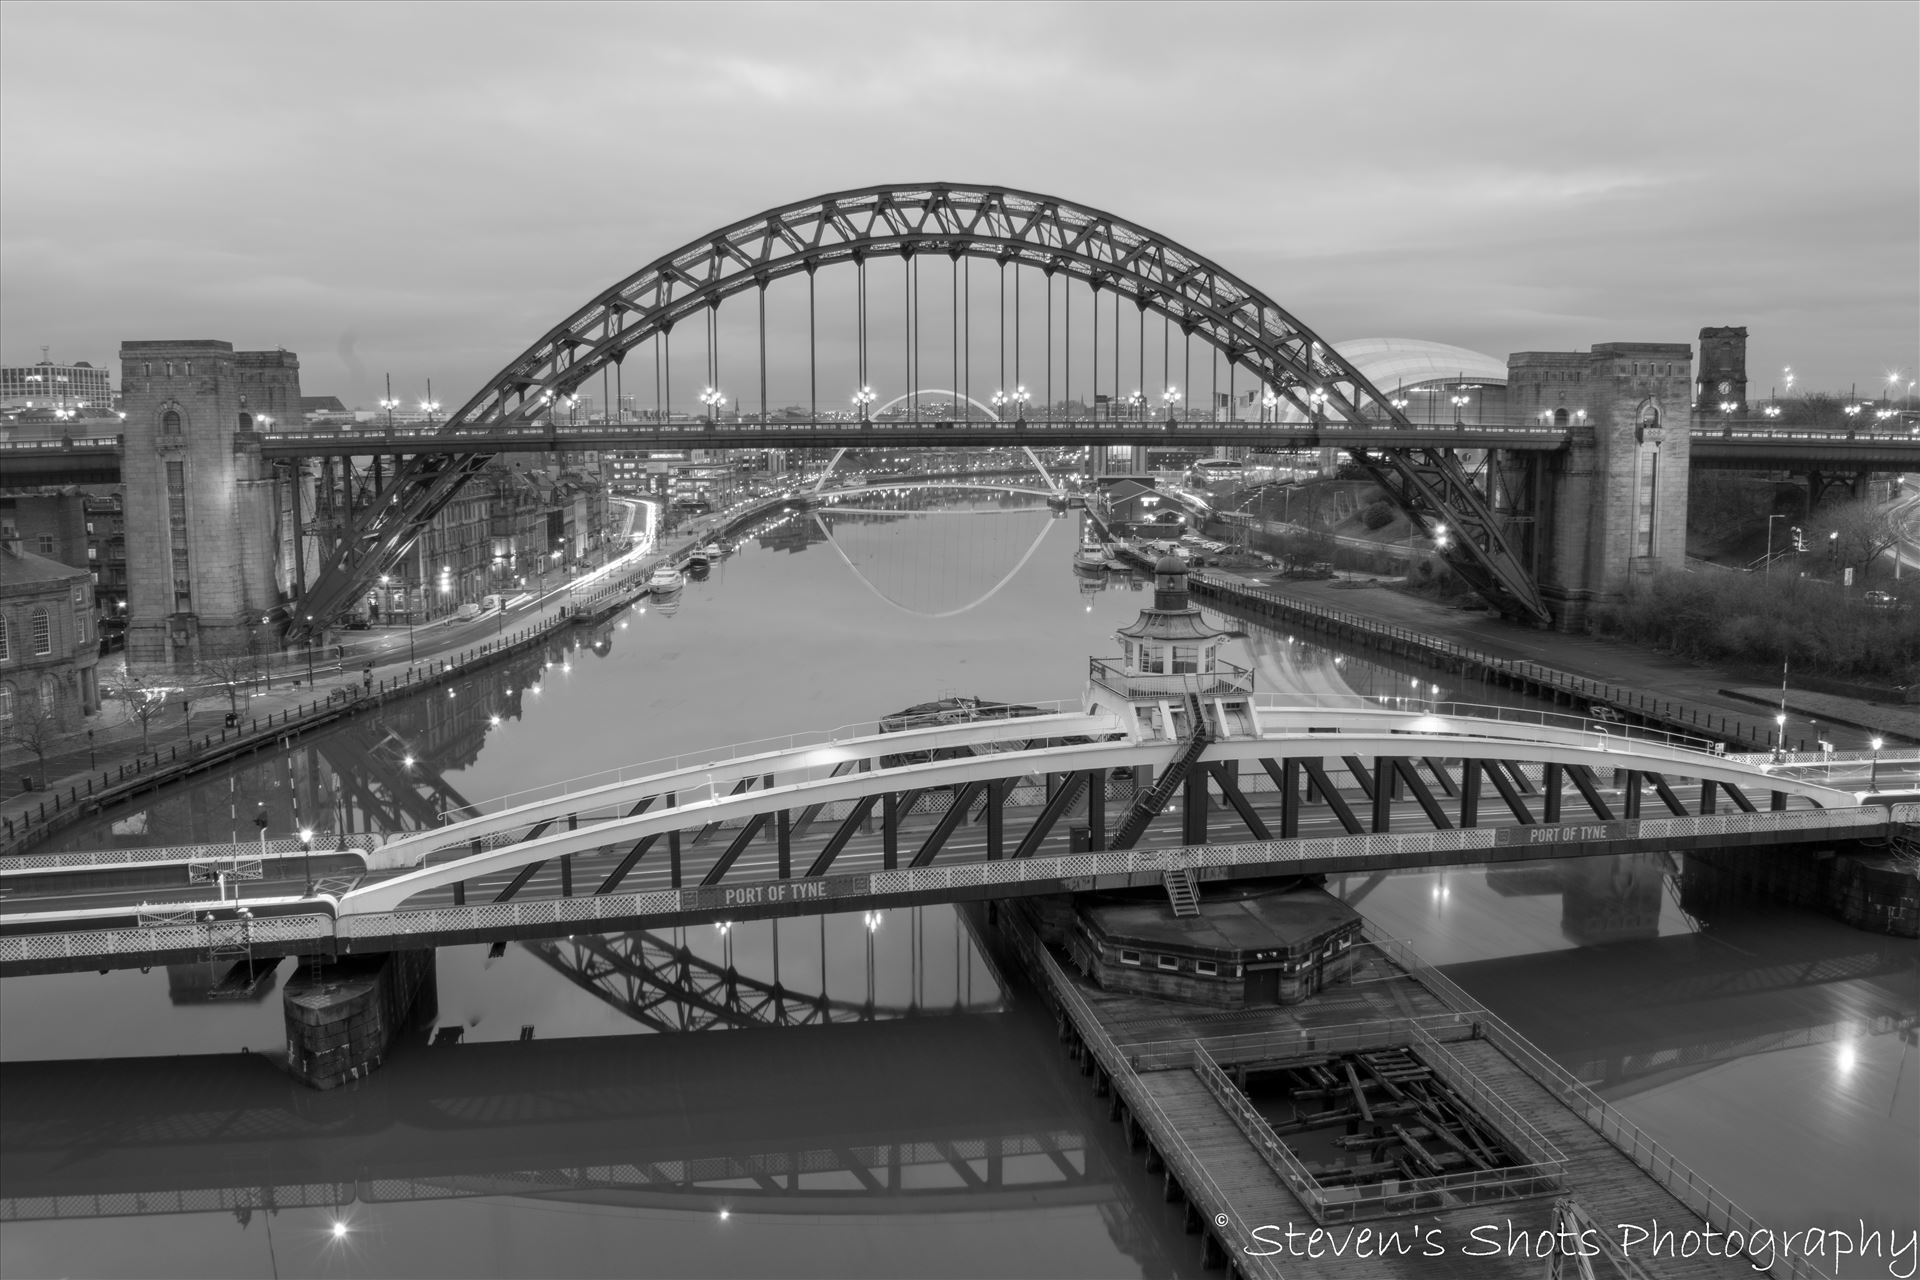 Swing bridge and Tyne bridge in black and white from the high level 6.3 (1).jpg -  by Steven's Shots Photography